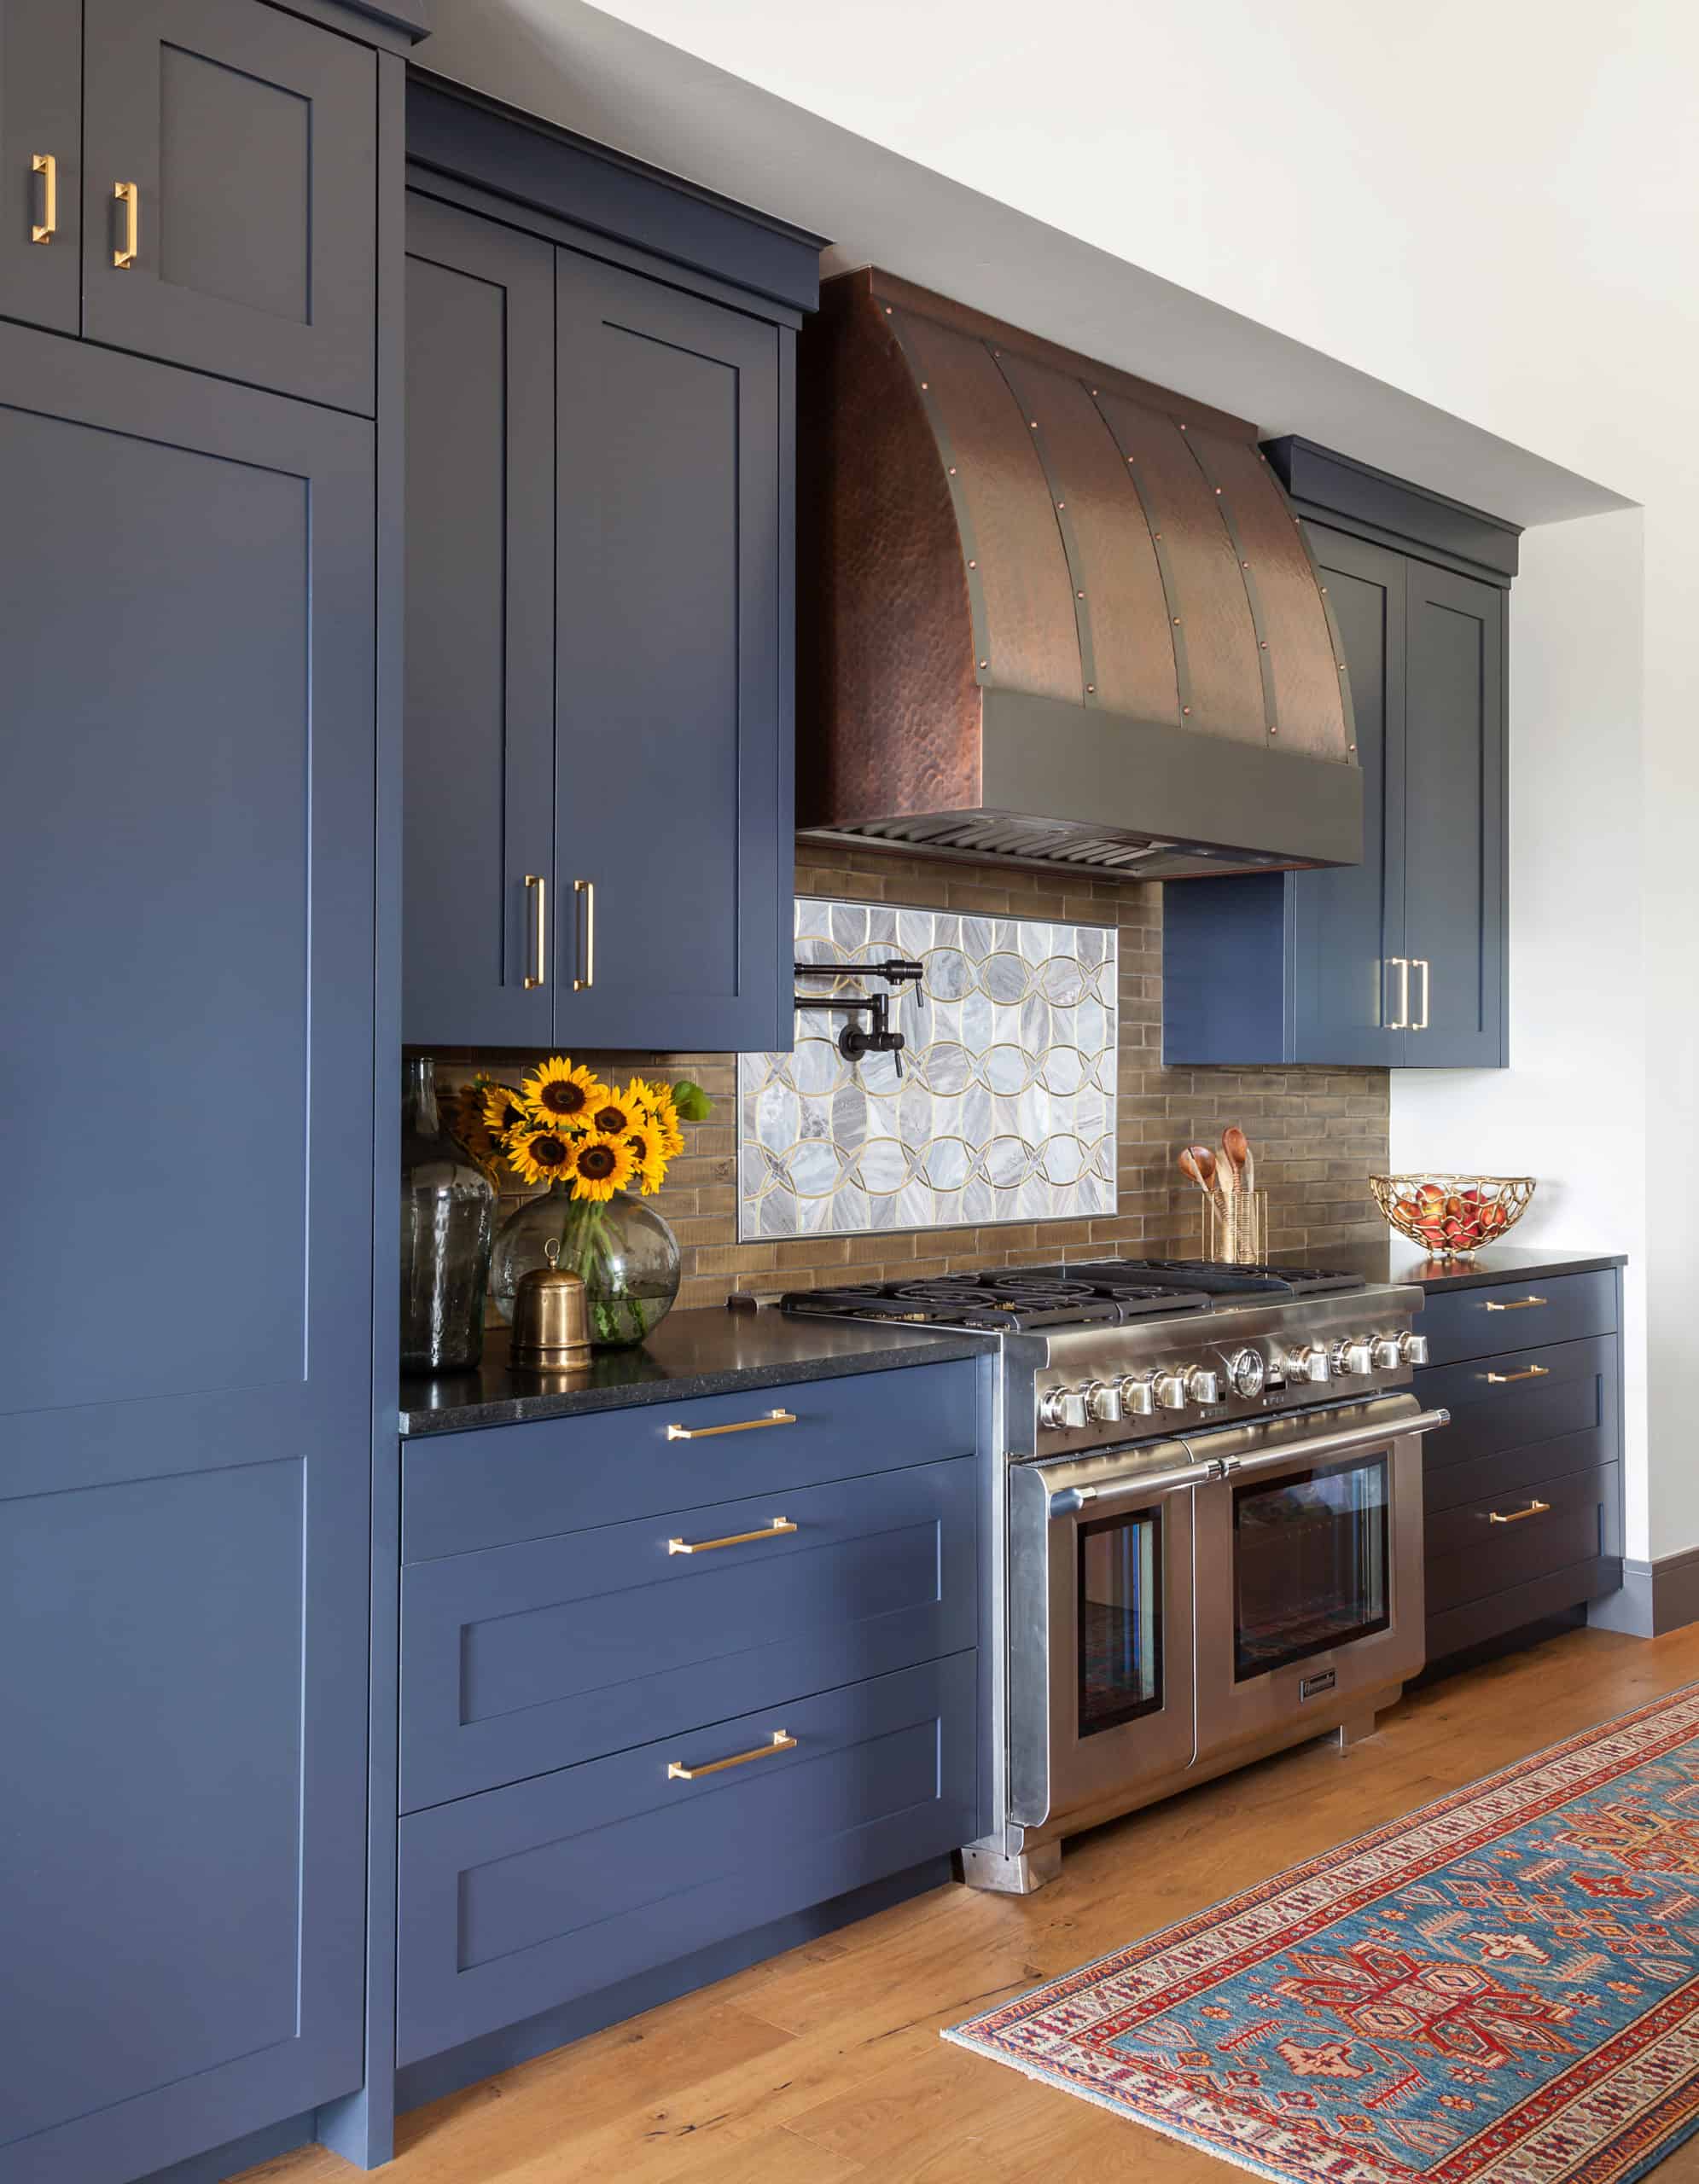 Blue kitchen cabinets copper hood in upscale kitchen